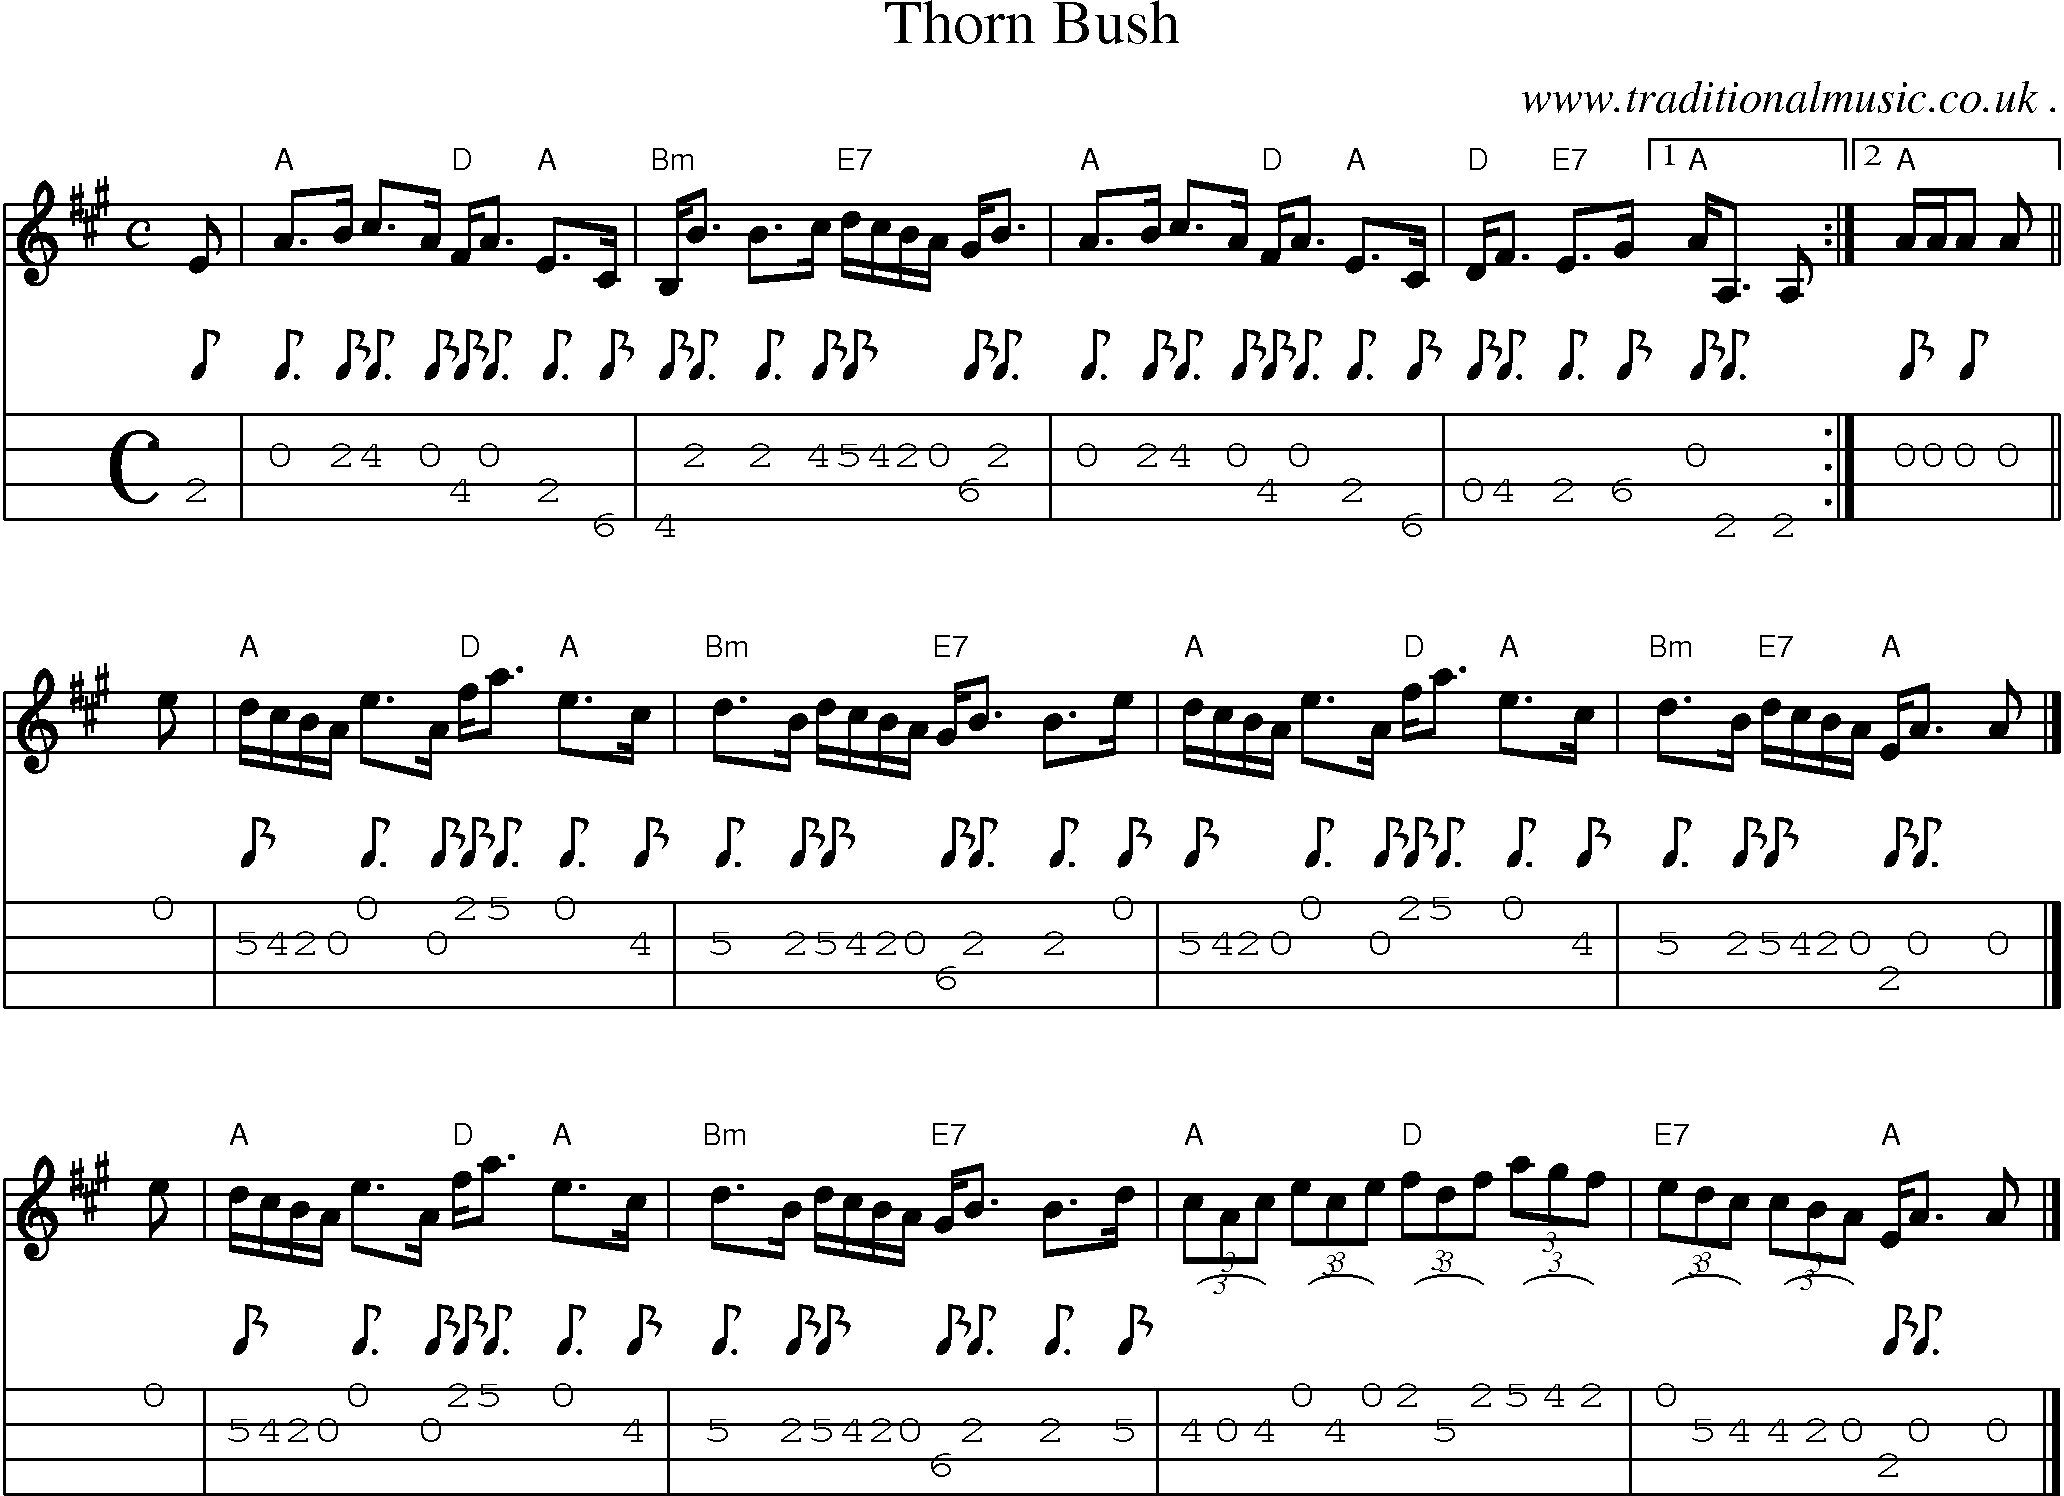 Sheet-music  score, Chords and Mandolin Tabs for Thorn Bush